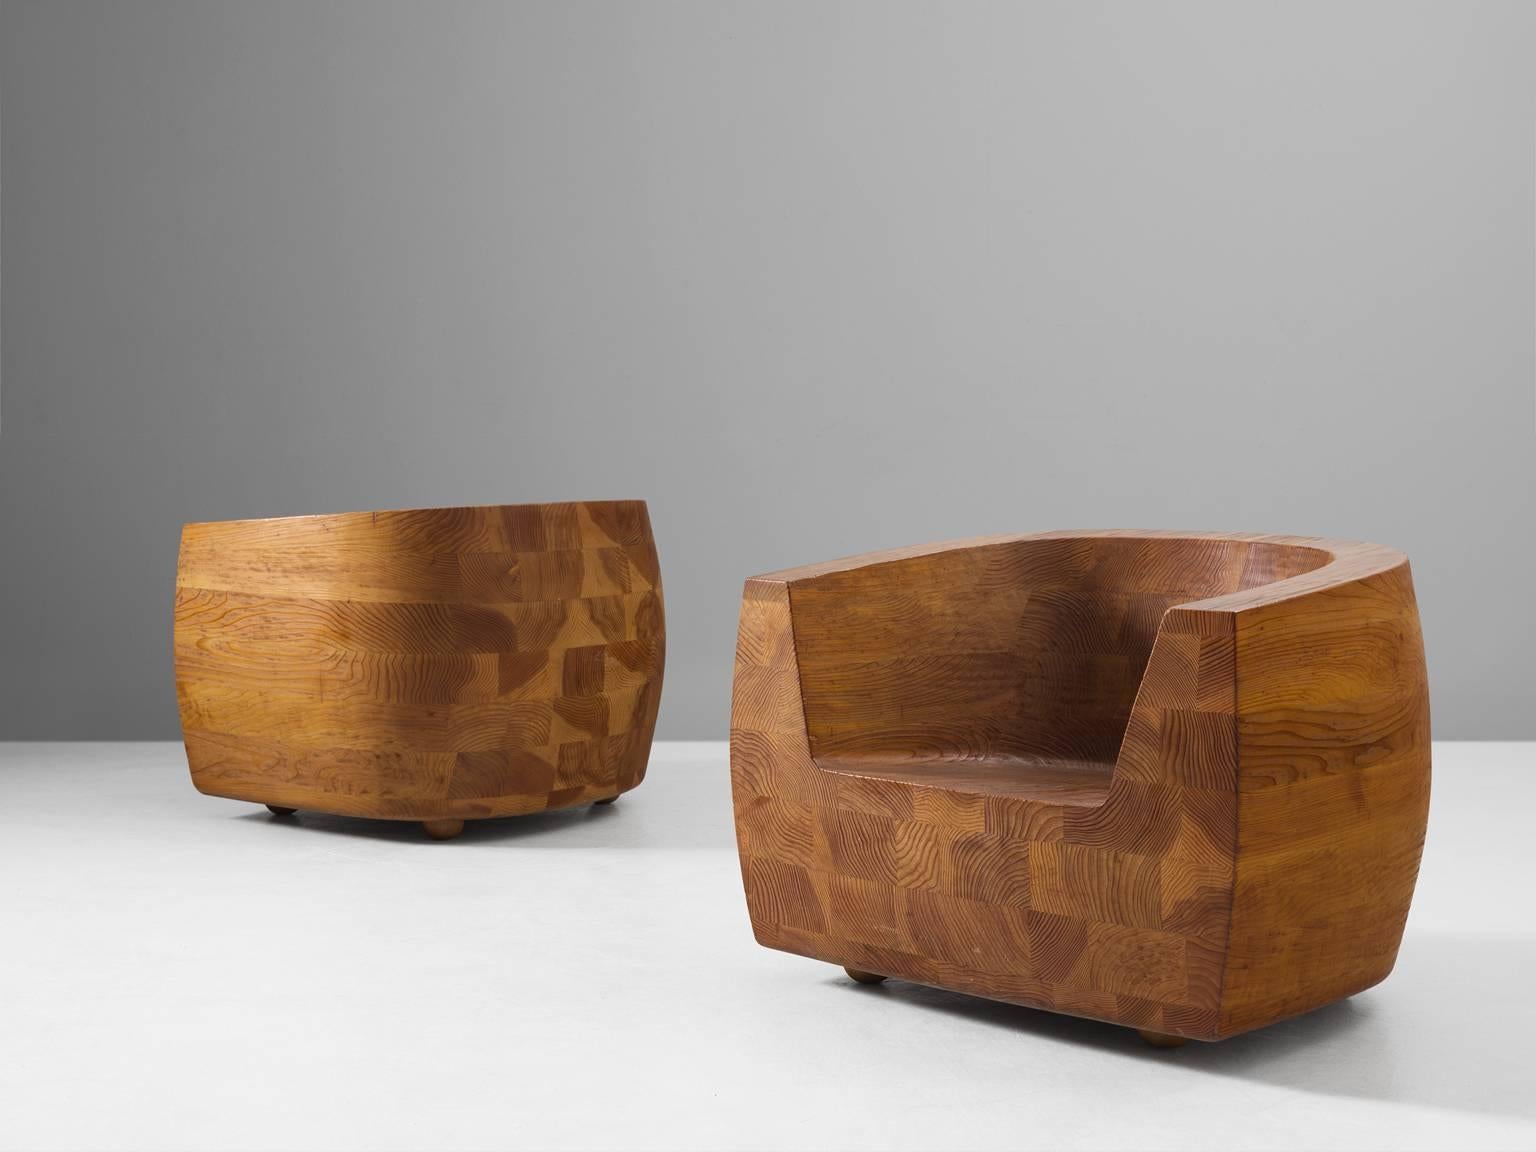 Isamo Kenmochi for Tendo, Kashiwado chairs, cedar, Japan, 1961. 

The rare vintage editions of the 'Kashiwado' armchairs were specially designed for the famous Sumo wrestler Kashiwado Tsuyoshi. Highly rare to find as a vintage pair in this excellent